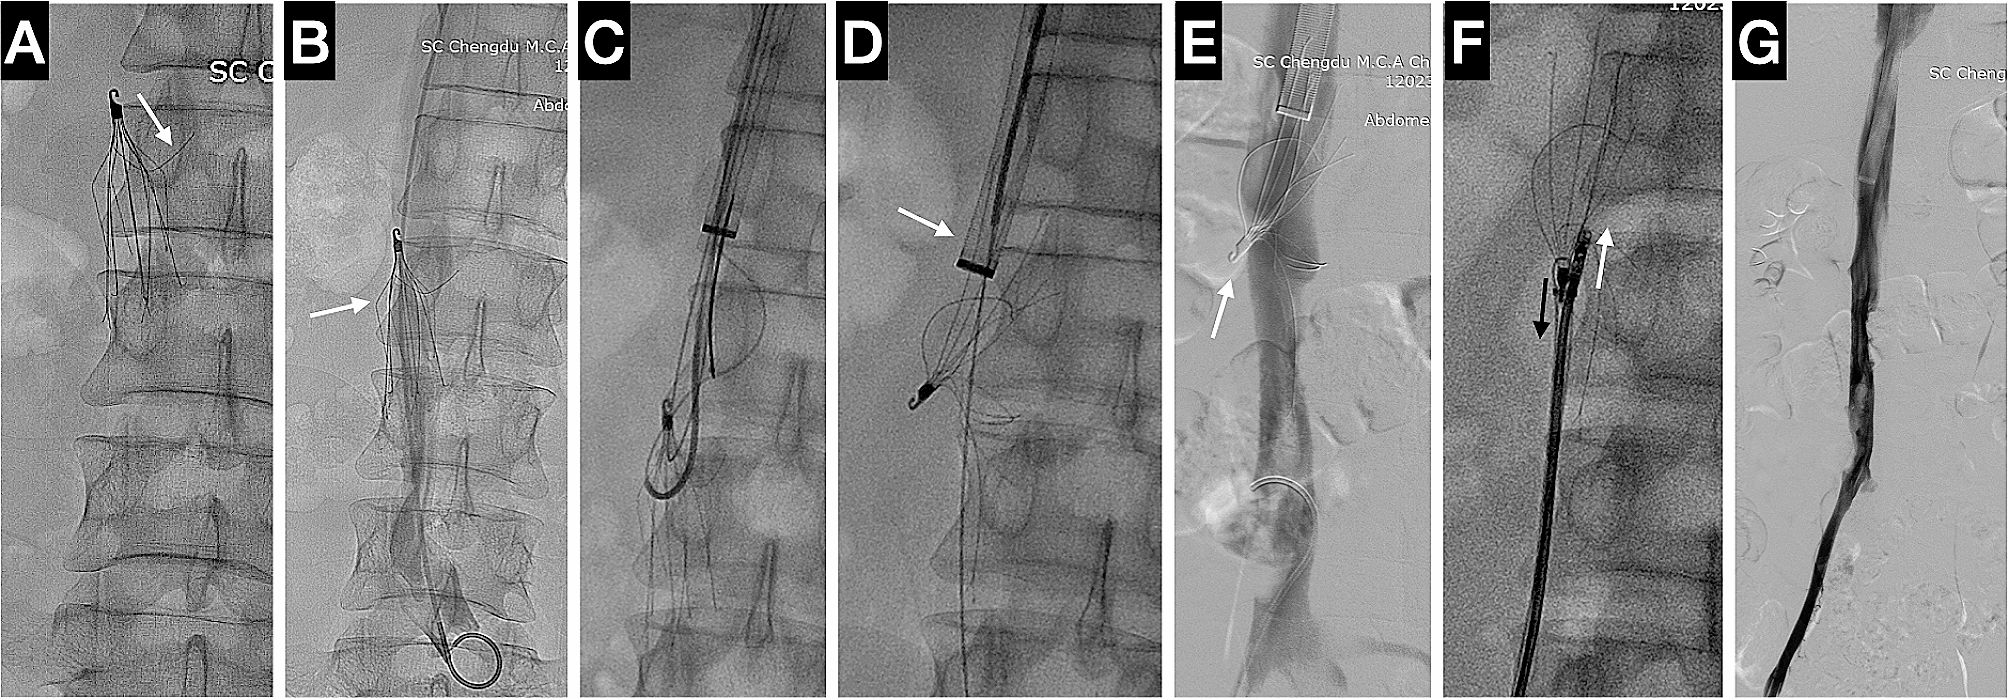 Successful retrieval of tip-embedded inferior vena cava filter using a modified forceps technique: case report